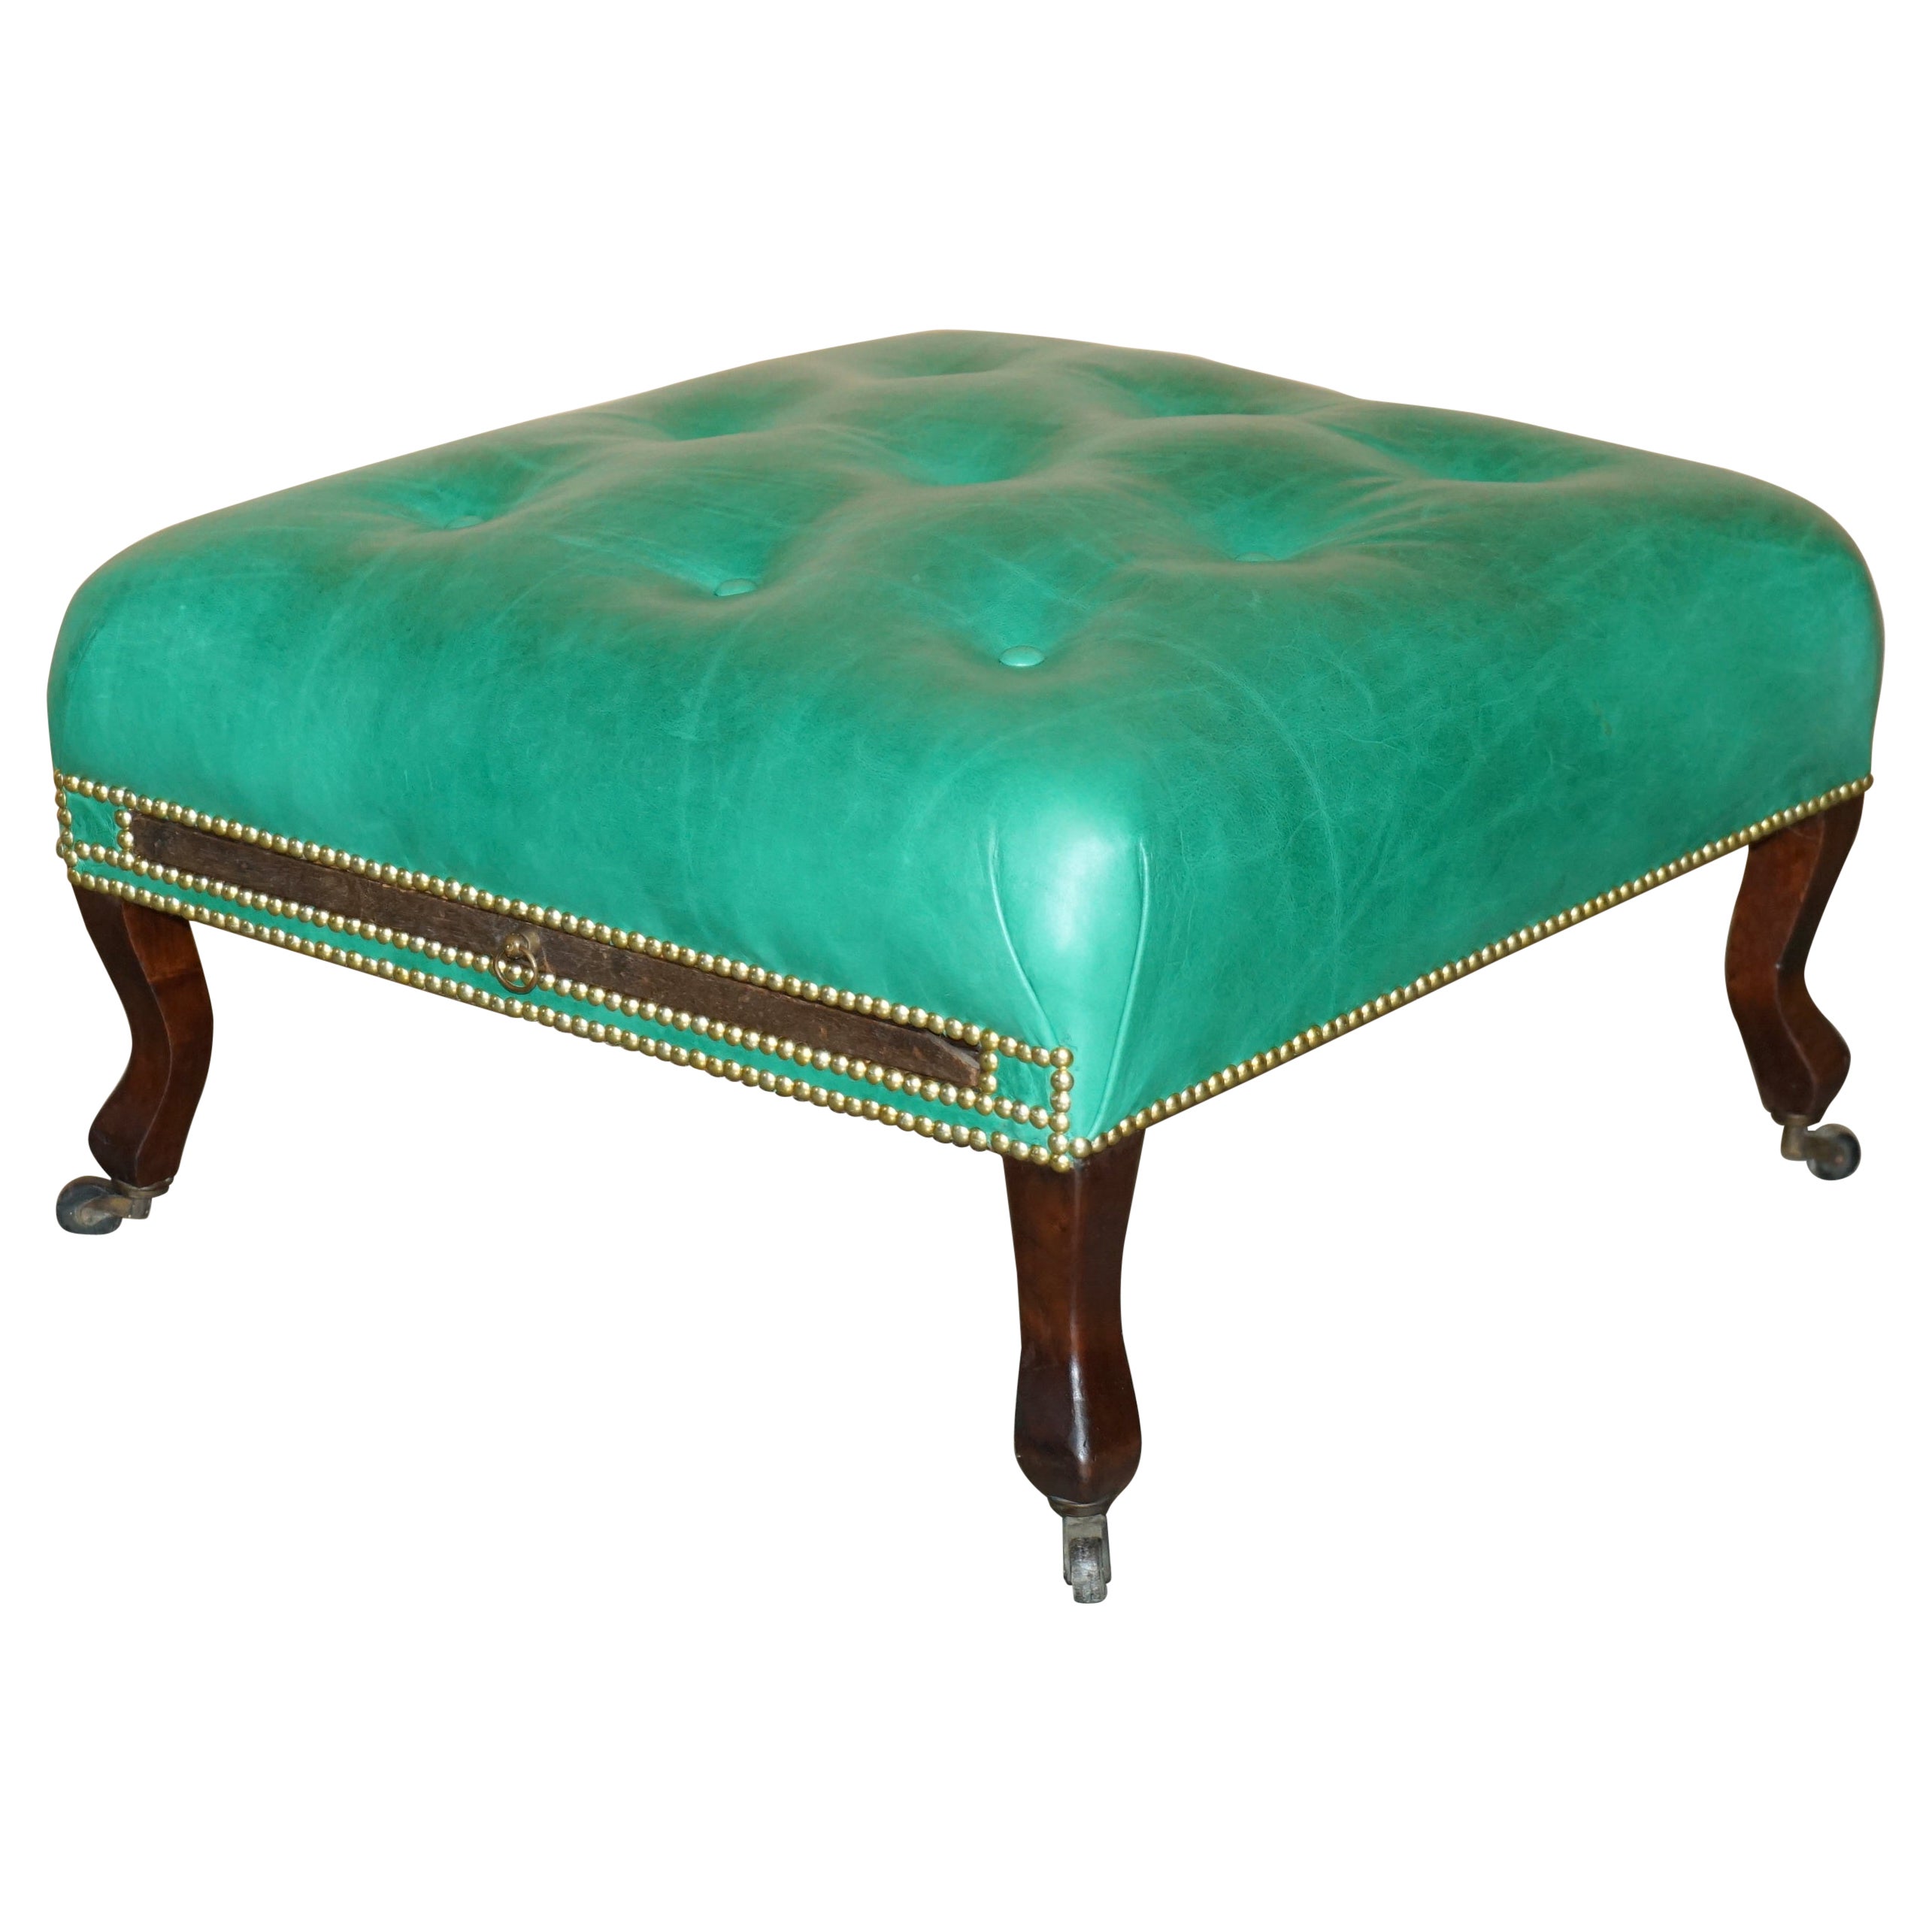 RARE ANTIQUE GEORGIAN 1760 CHESTERFIELD LEATHER FOOTSTOOL WiTH SLIP SERVING TRAY For Sale